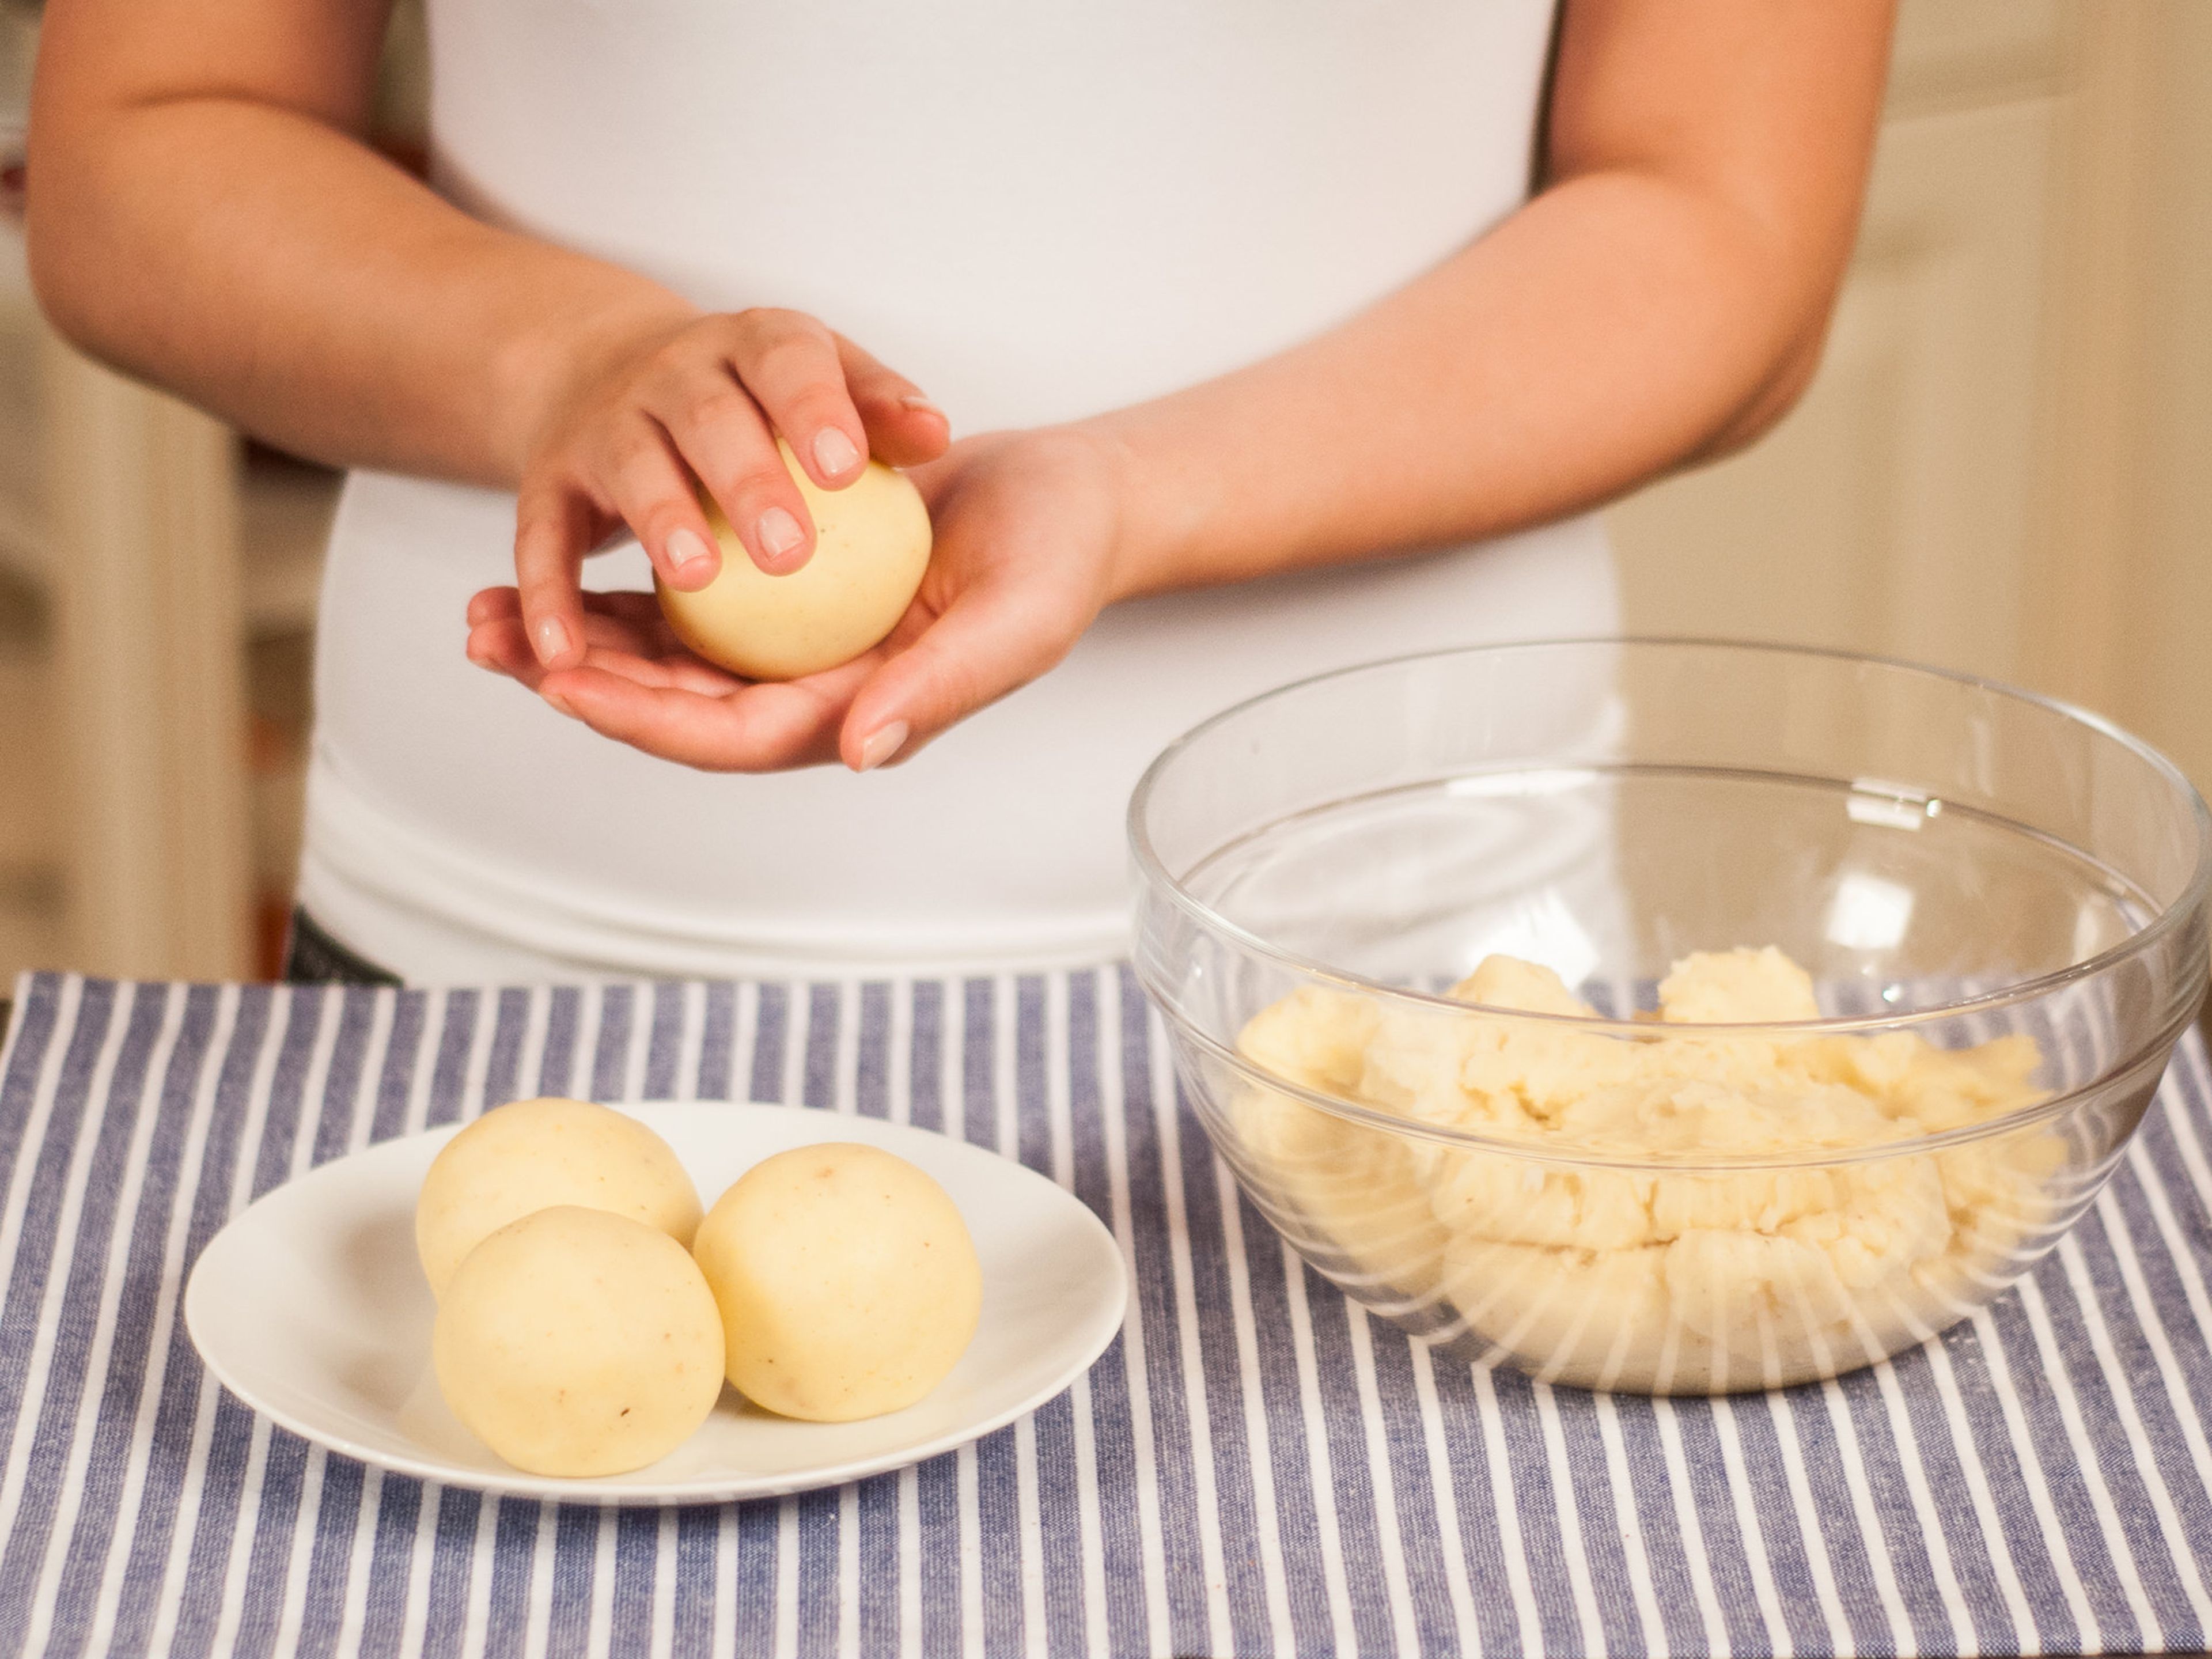 Take a handful of the dough (approx. 3 tablespoons each) and form into small balls by rolling each dough ball between your palms. Set aside.